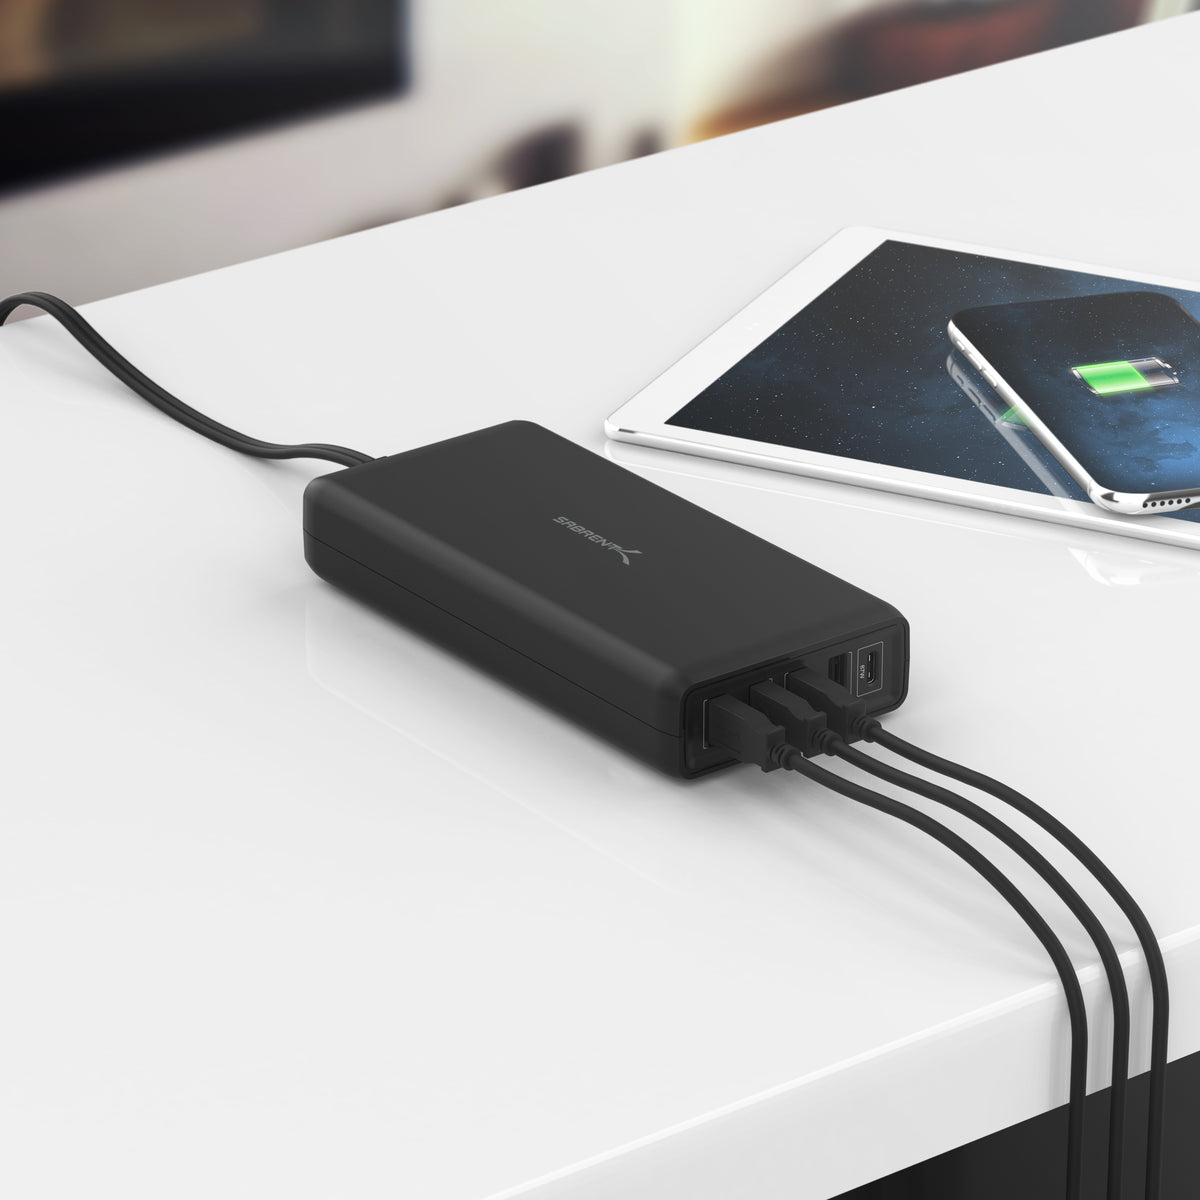 5-Port USB A / Type-C PD Smart Charger